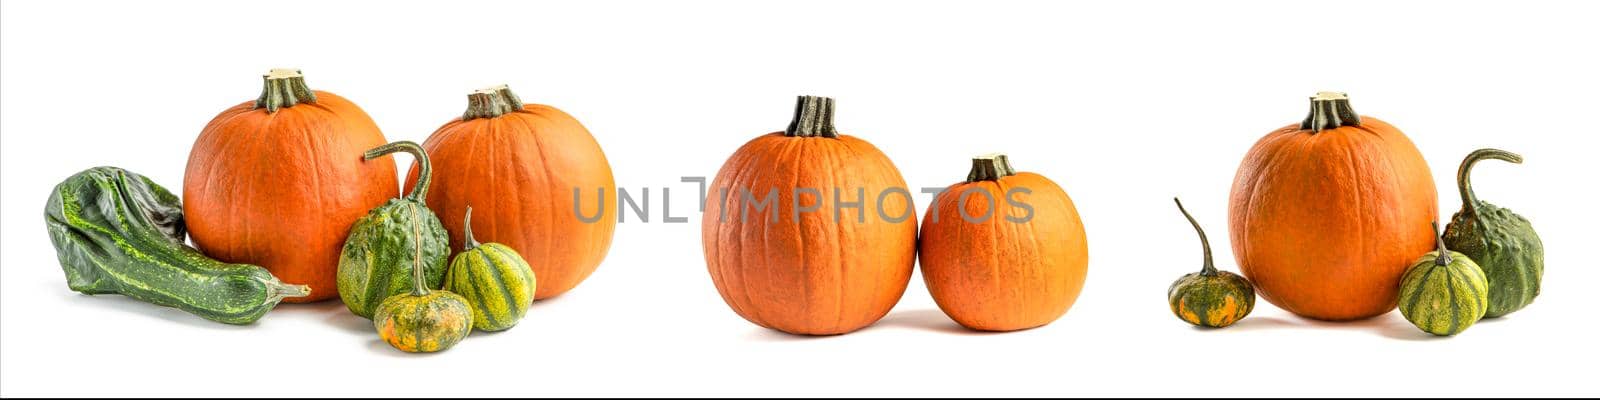 Autumn set of pumpkins isolated on white background for Halloween decoration. Set of pumpkins of different colors and shapes, green and orange by SERSOL